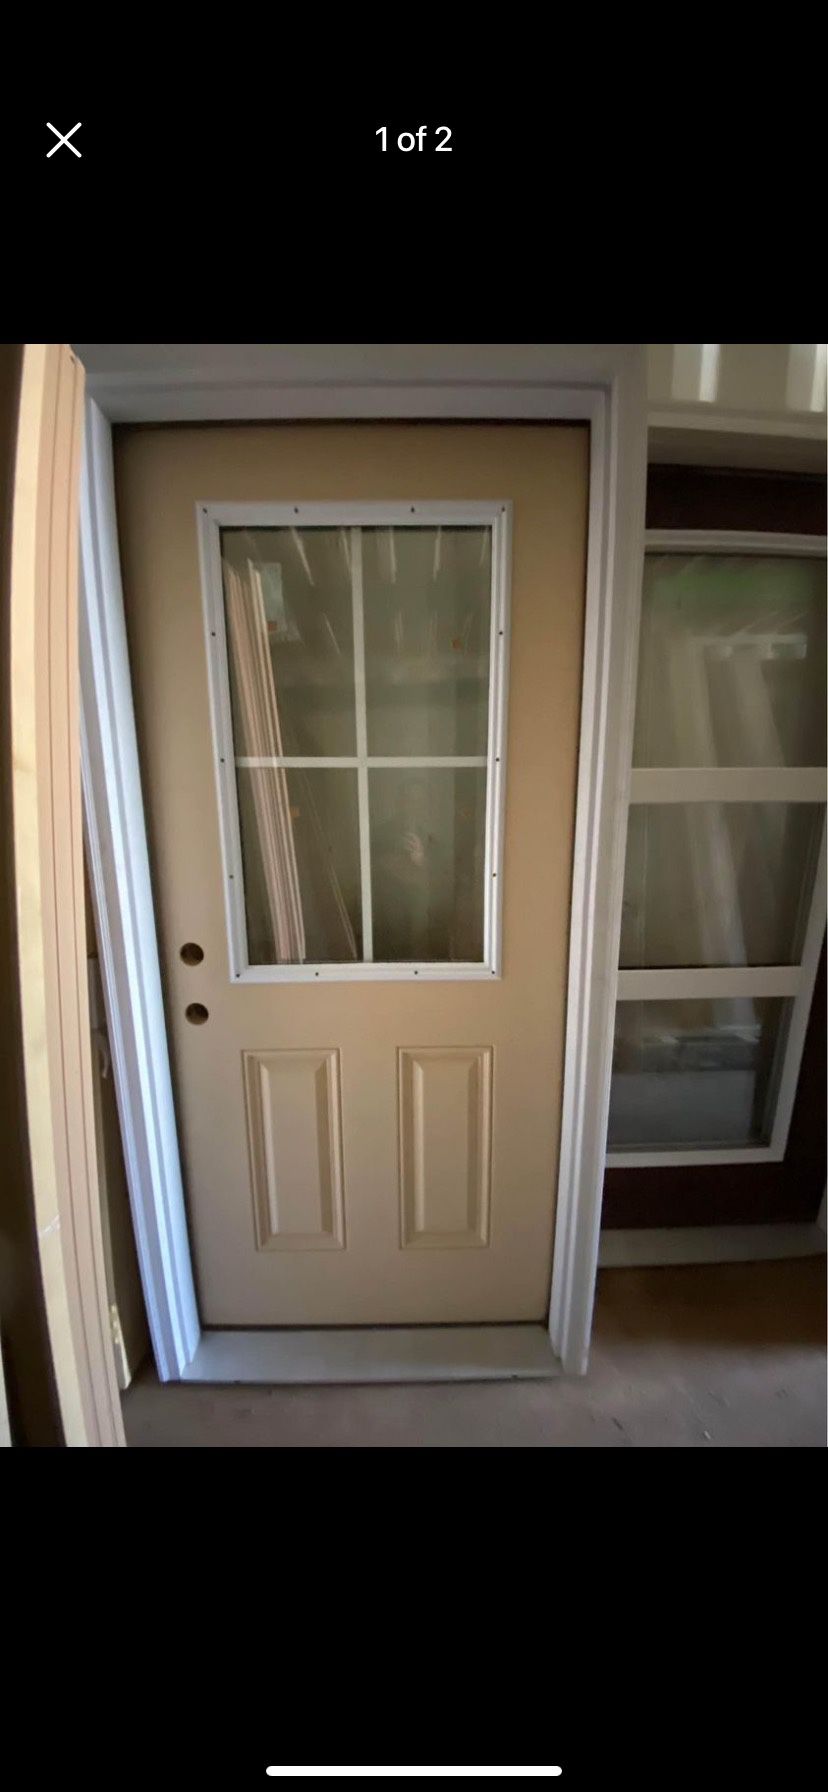 New Fiber glass door 36x80 38x82 with the frame